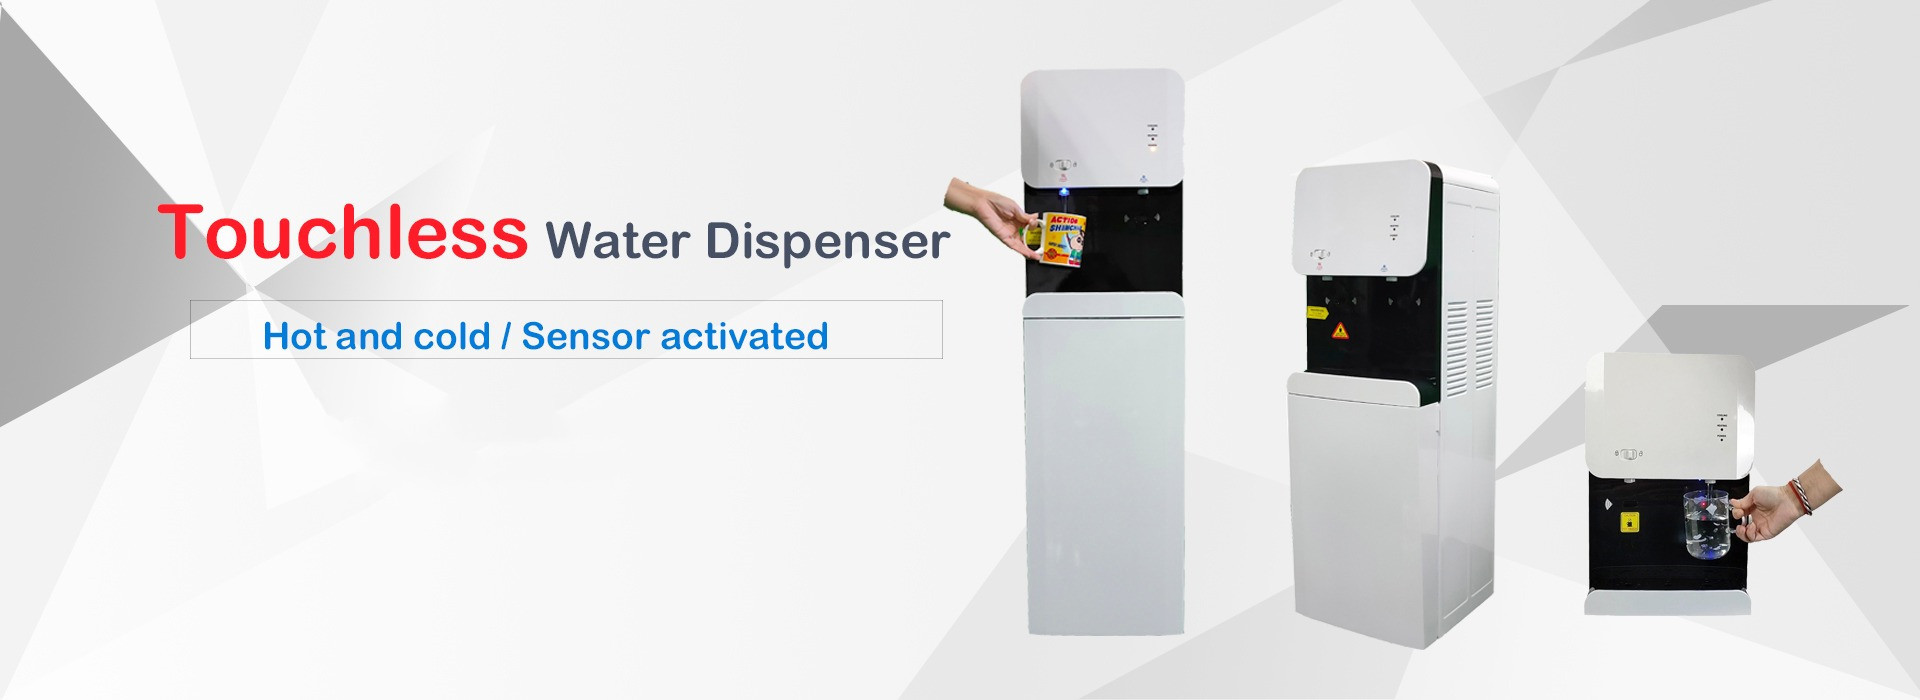 Quality Drinking Water Dispenser factory